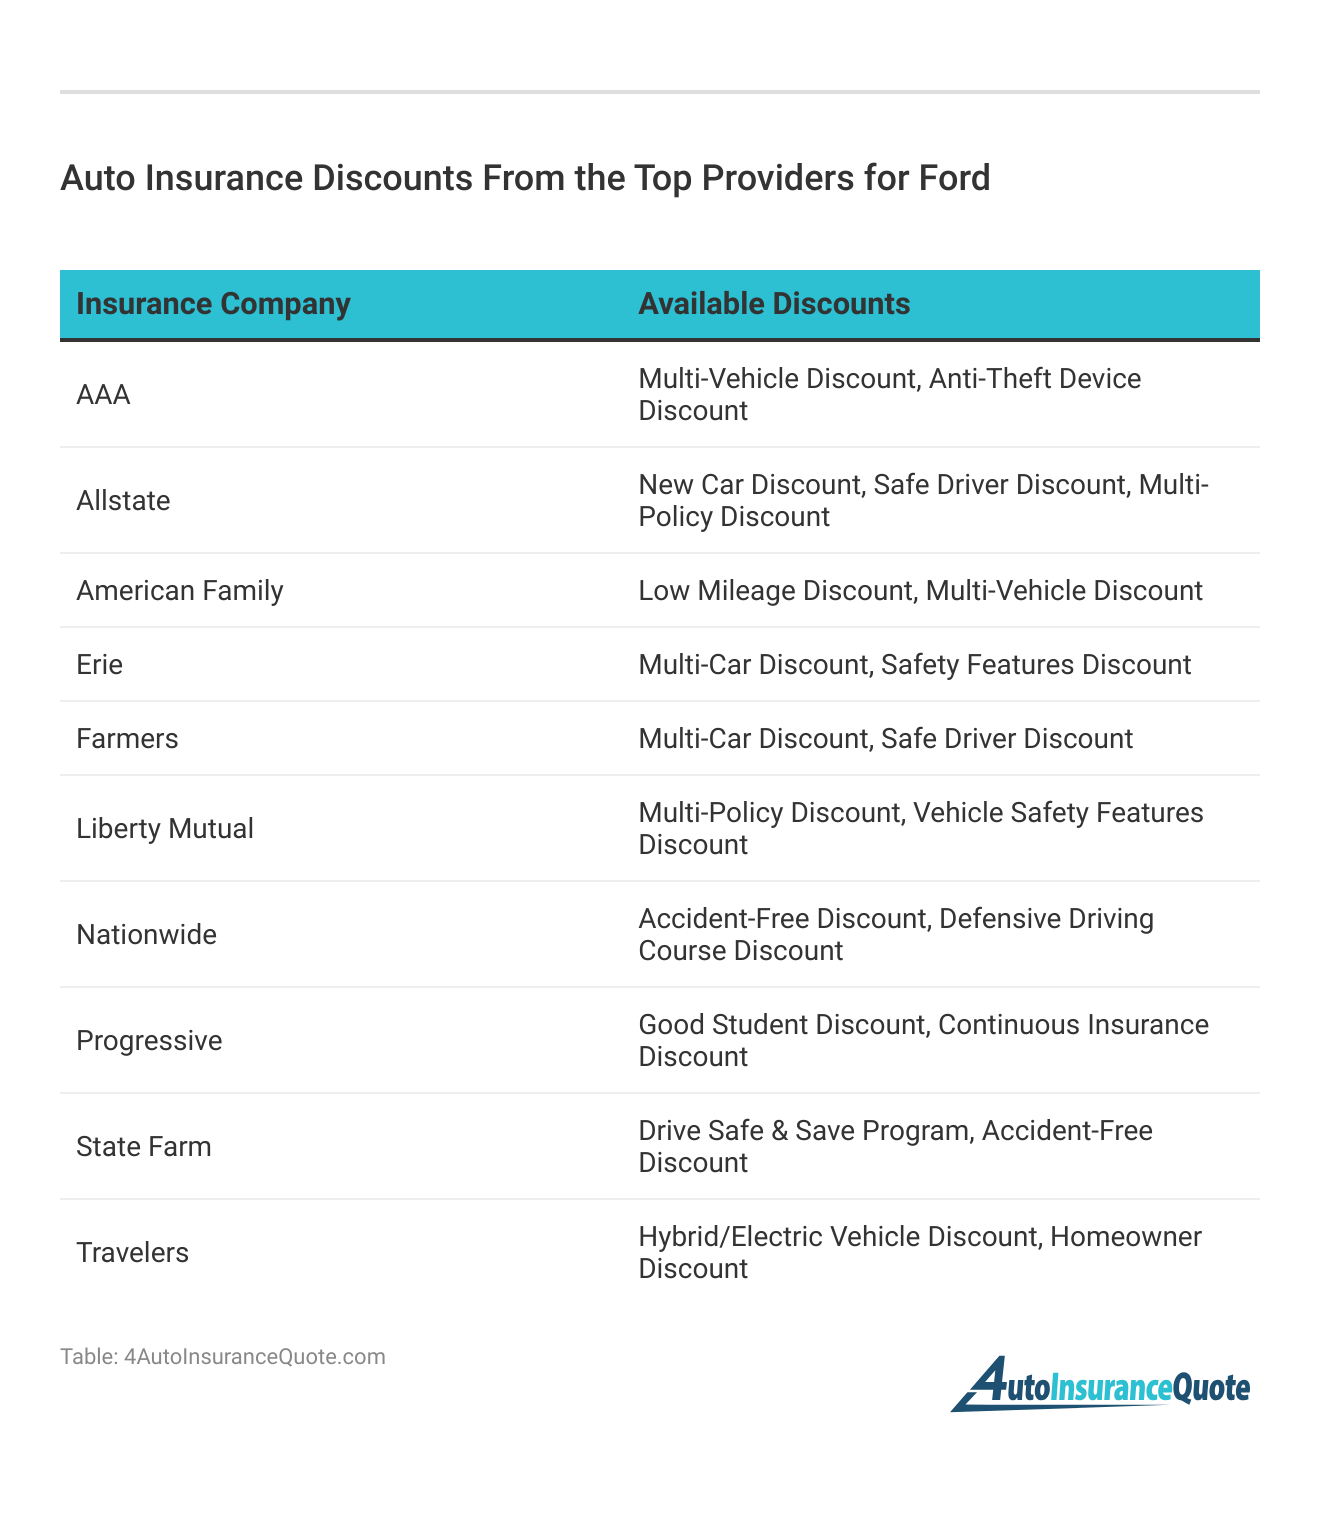 <h3>Auto Insurance Discounts From the Top Providers for Ford</h3> 